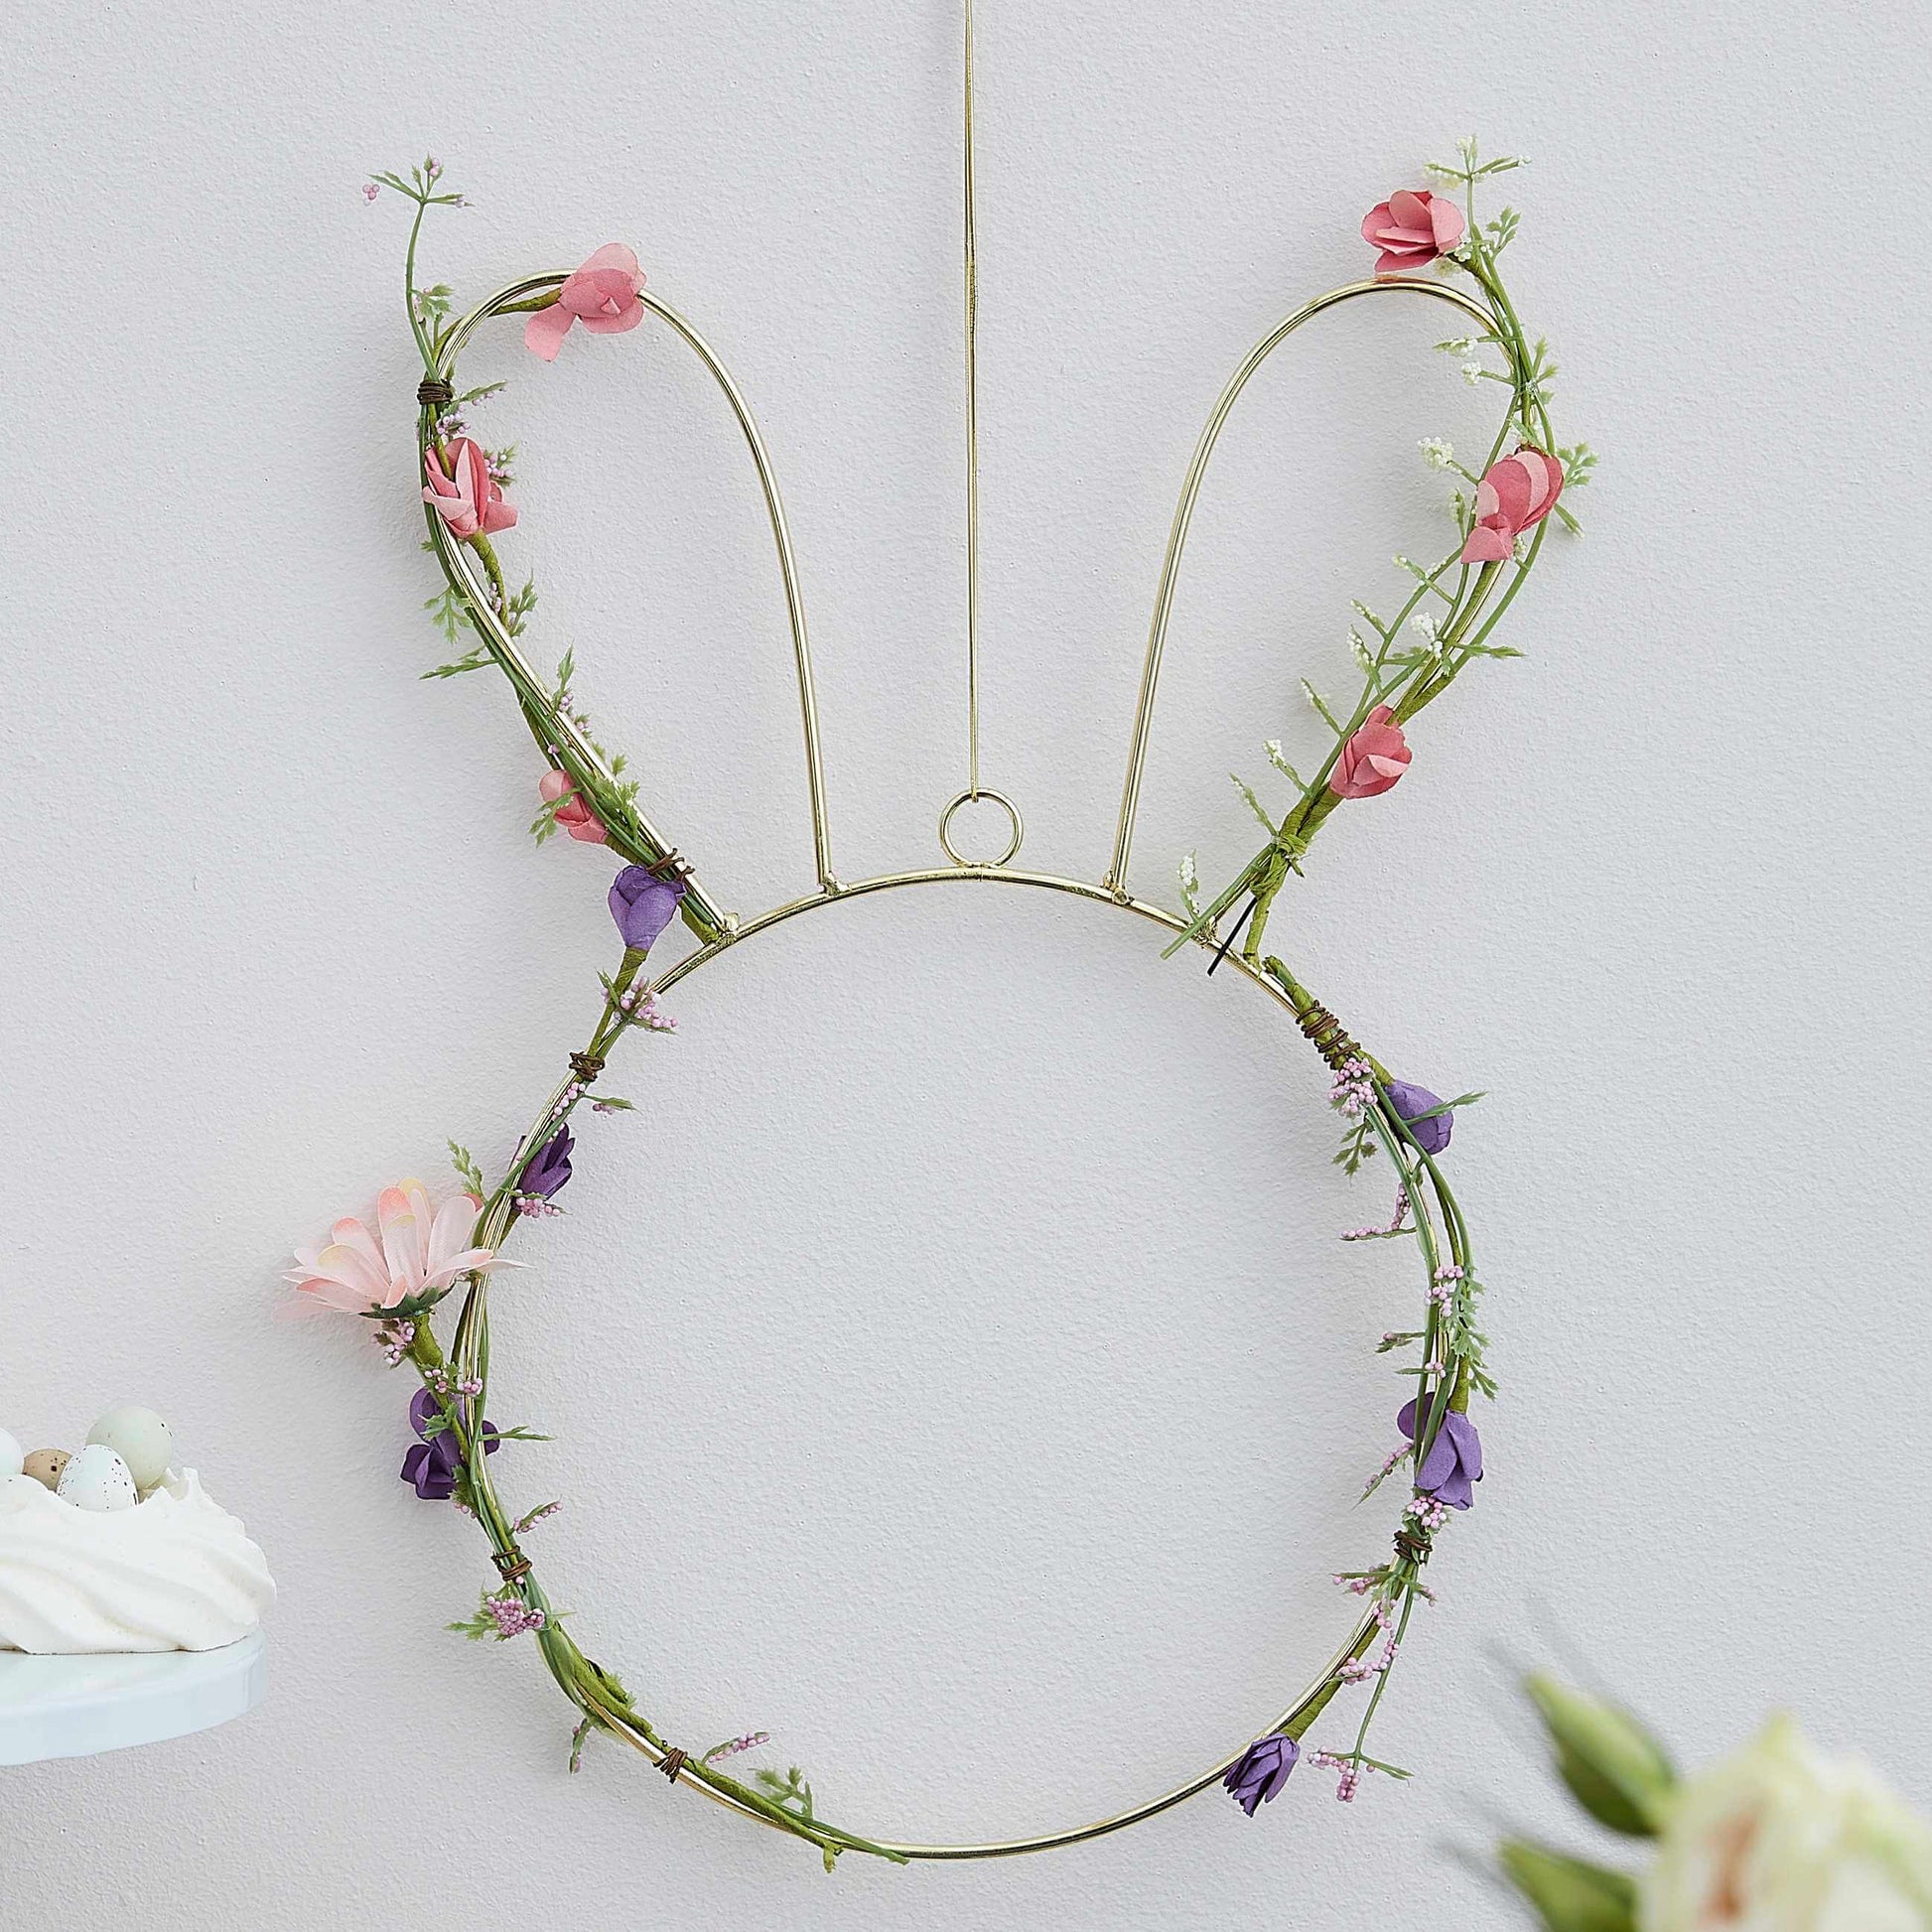 Contemporary Easter Bunny Wreath with Foliage